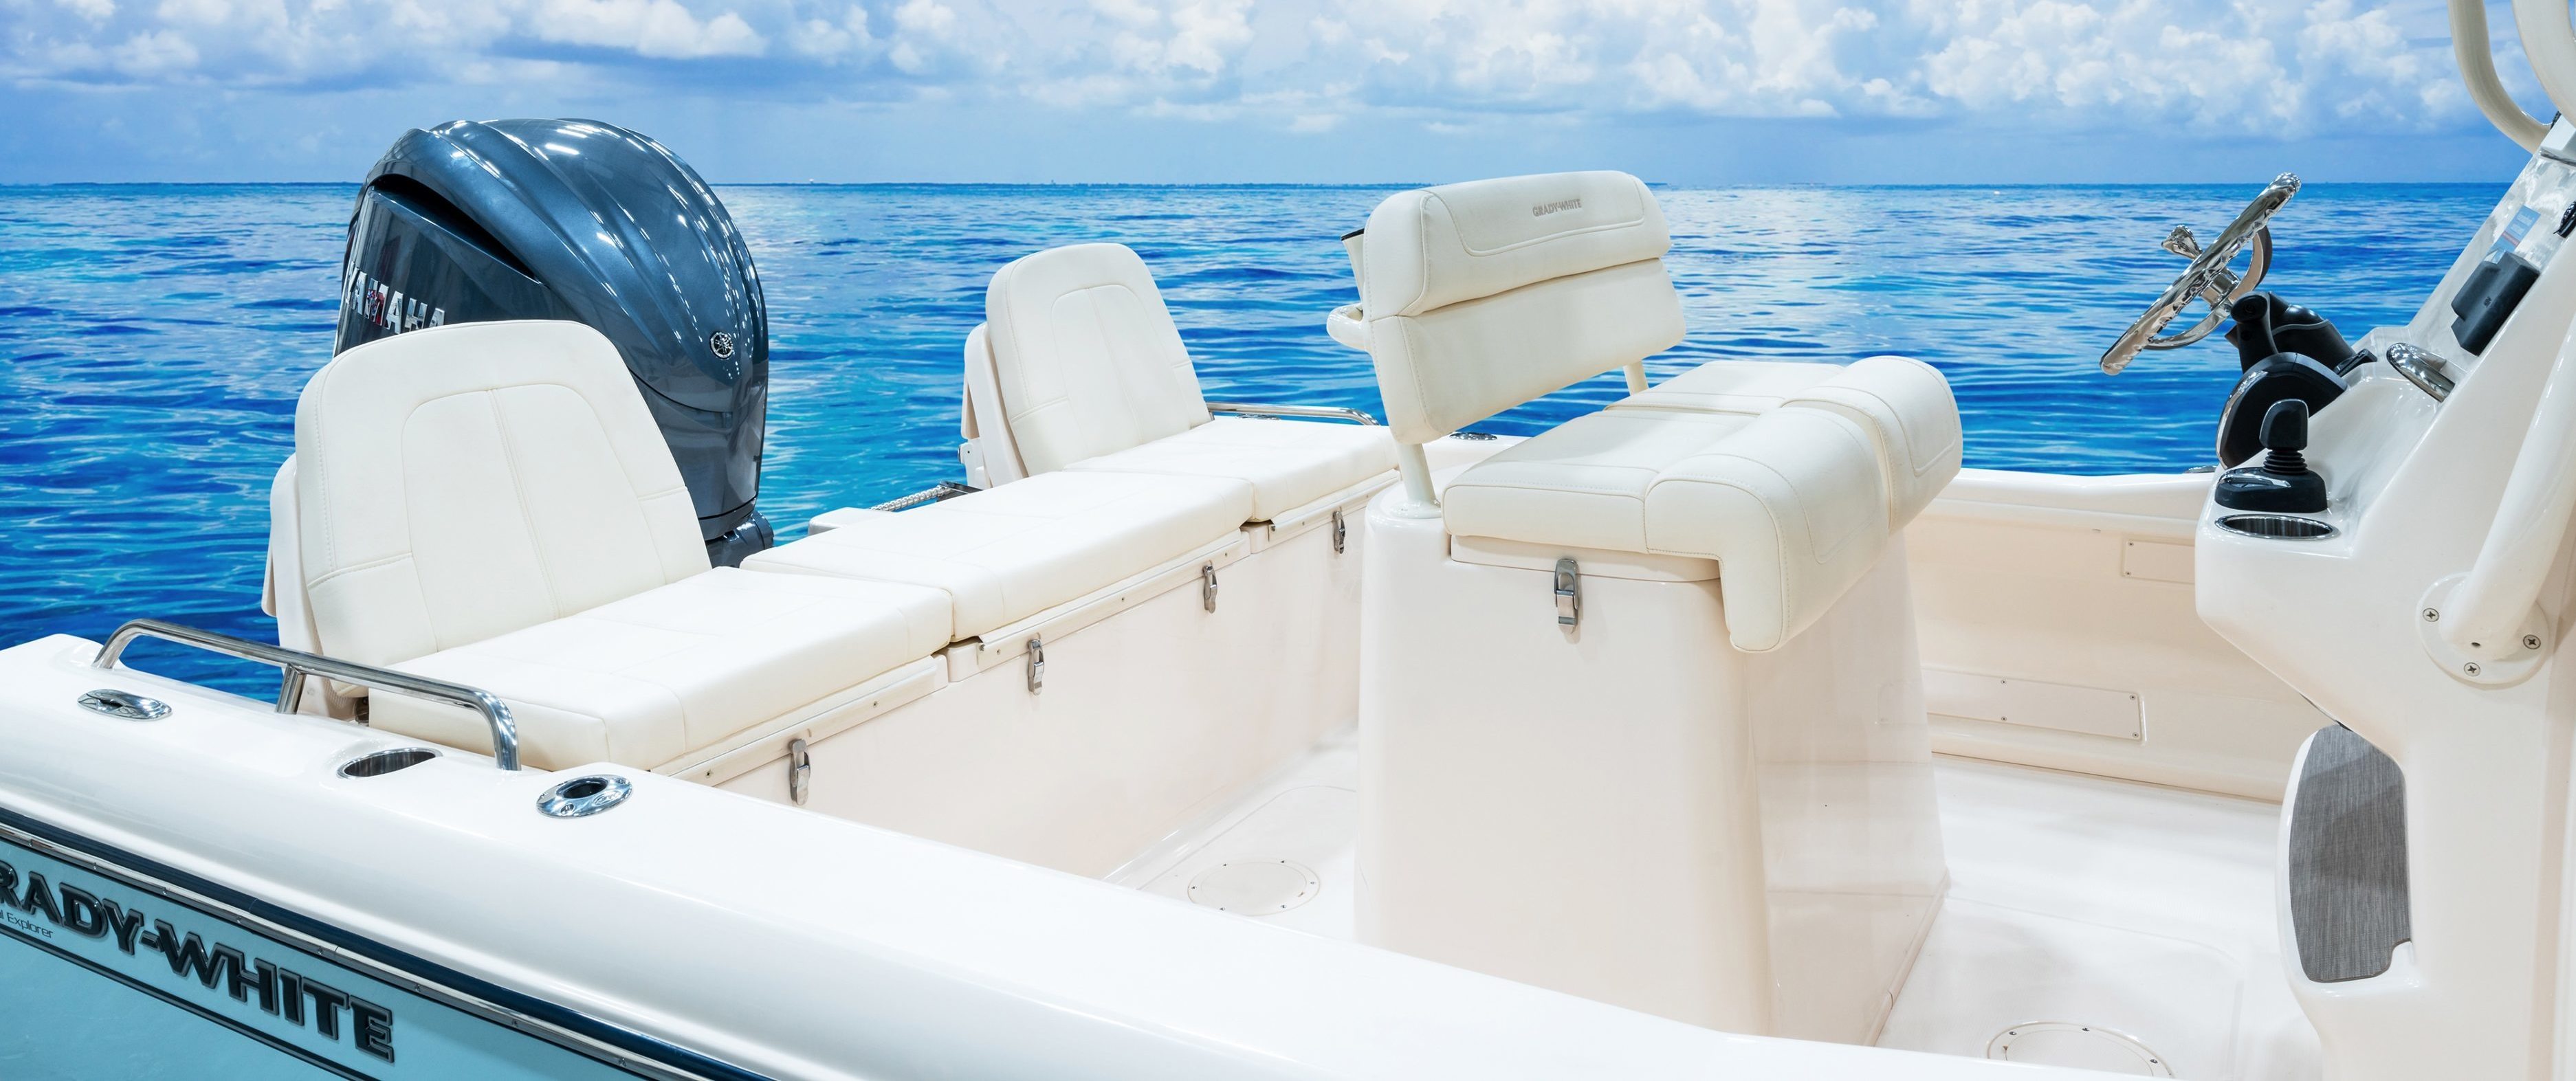 Image Tips for Keeping your Boat Clean 